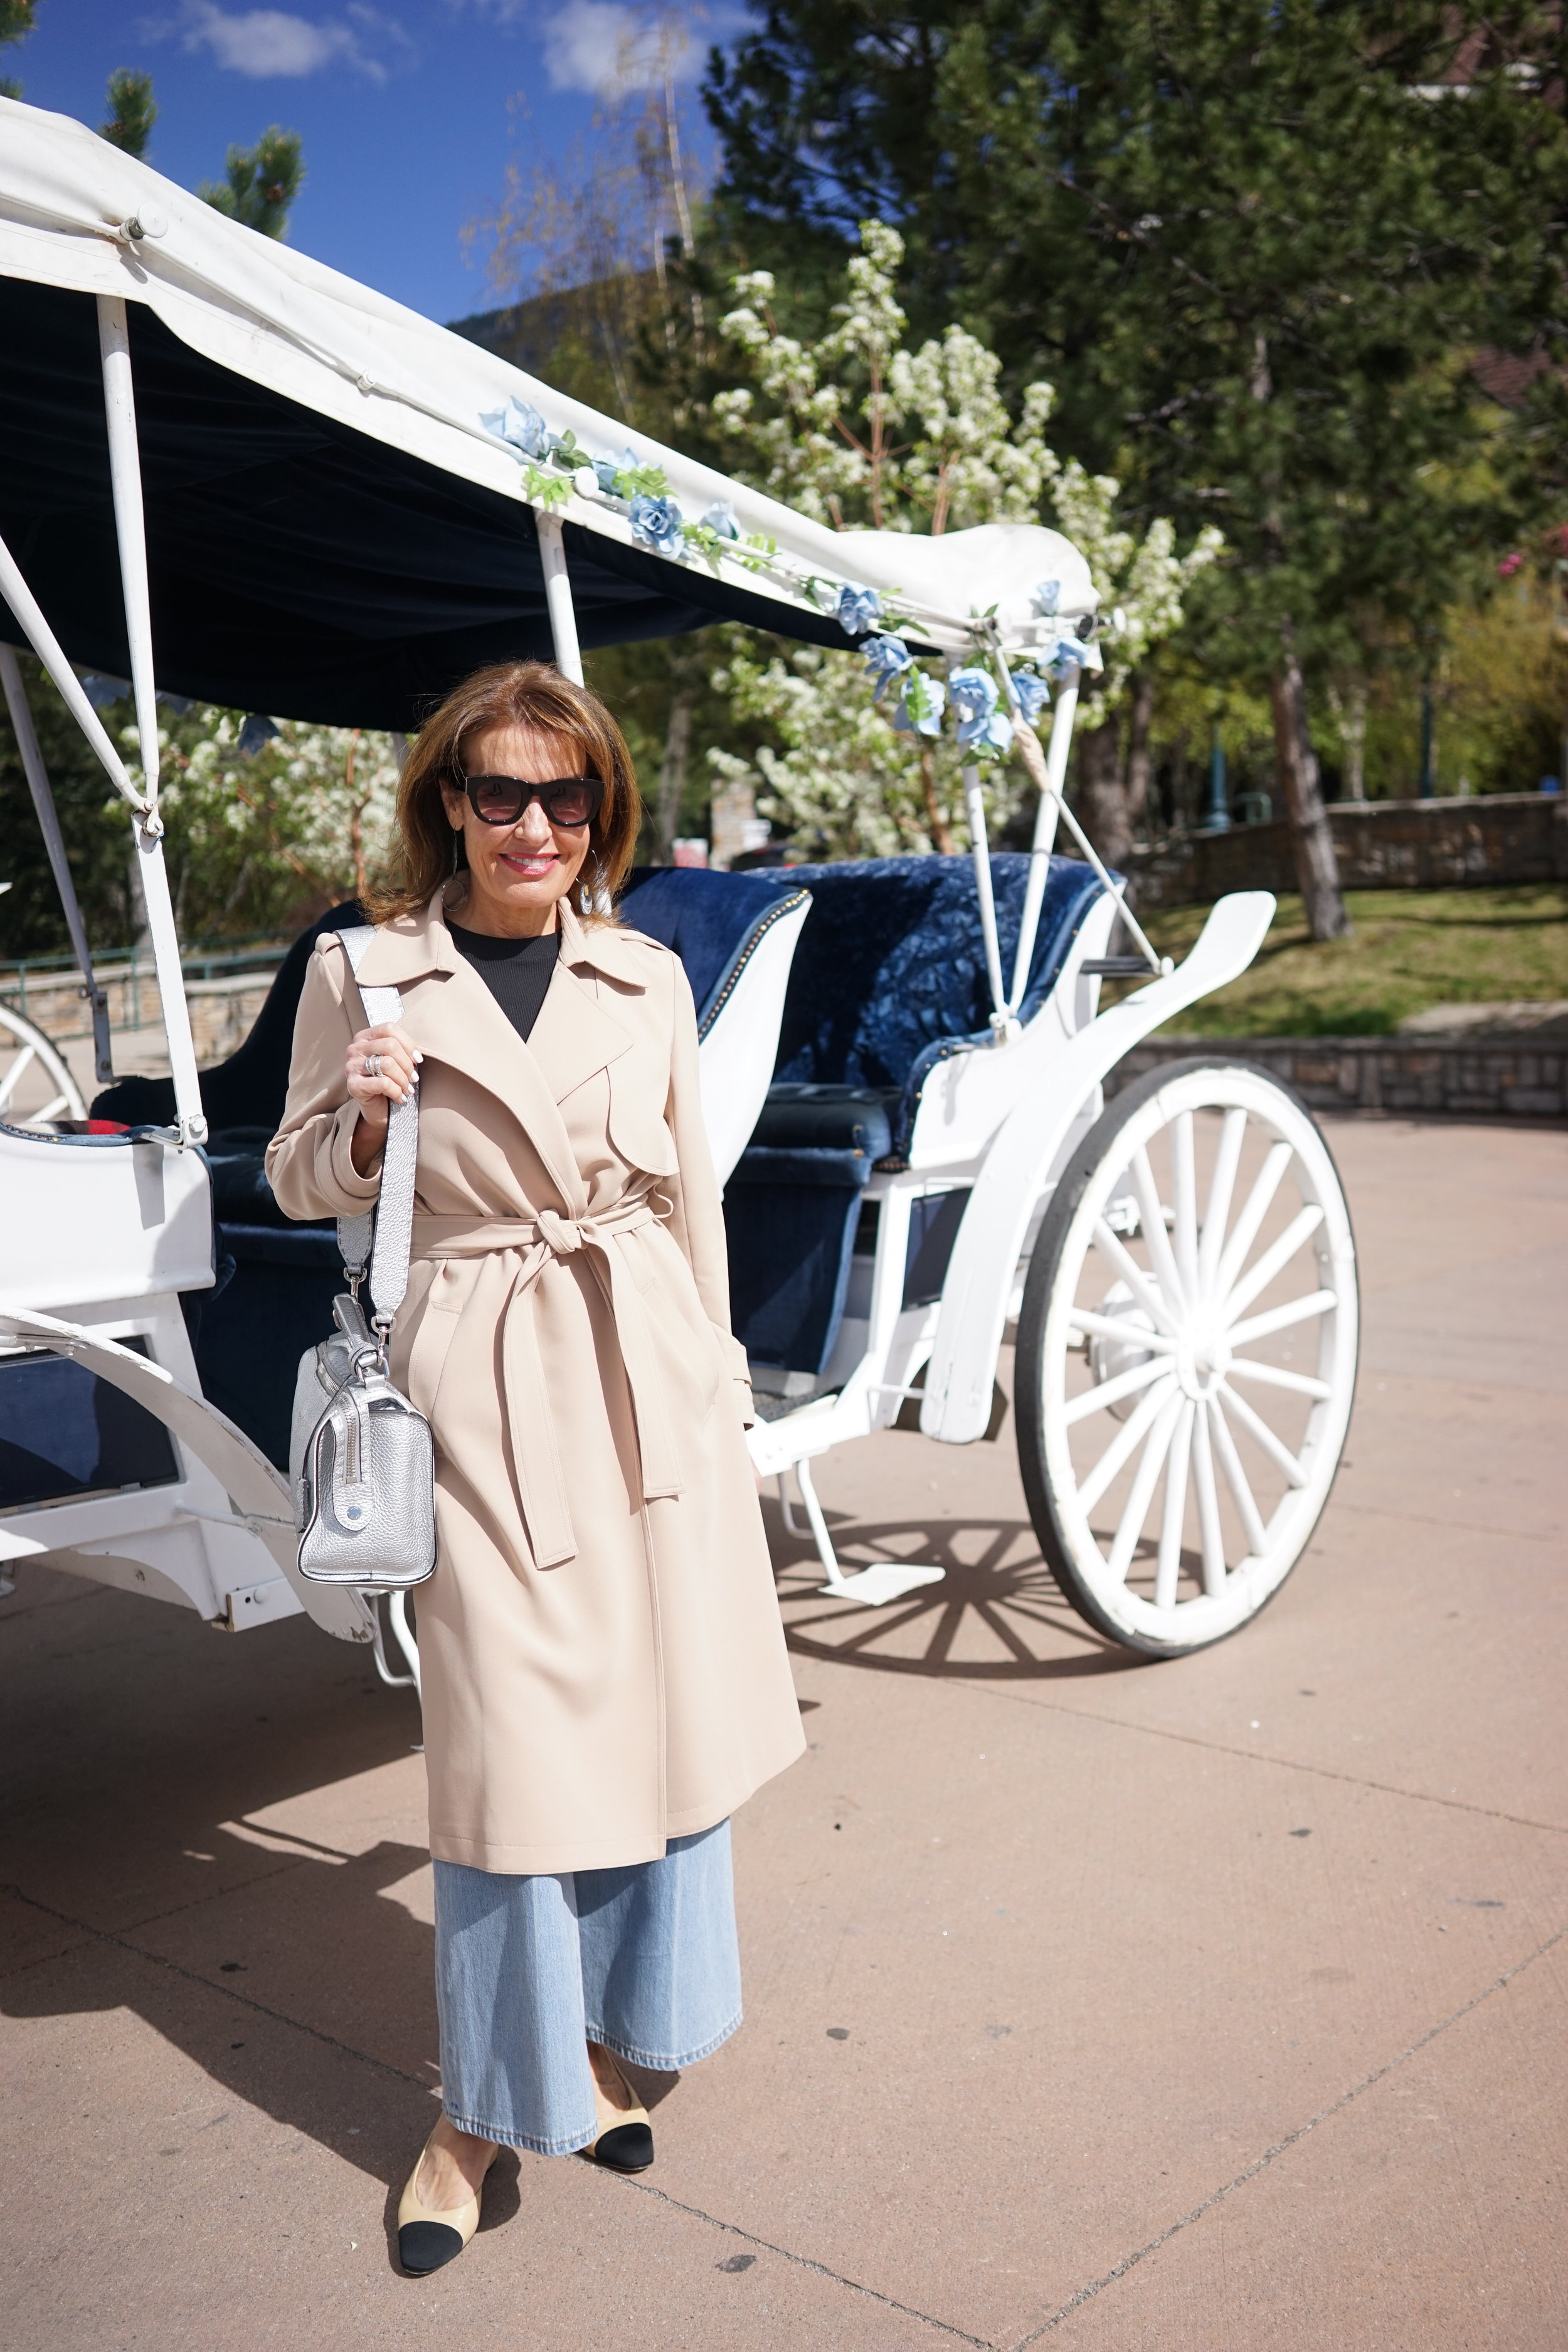 Theory Trench Coat and T- shirt, Marc Jacobs Jeans, Chanel Shoes, Earrings from Earth's Spirits, Fendi Bag, Celine Sunnies.